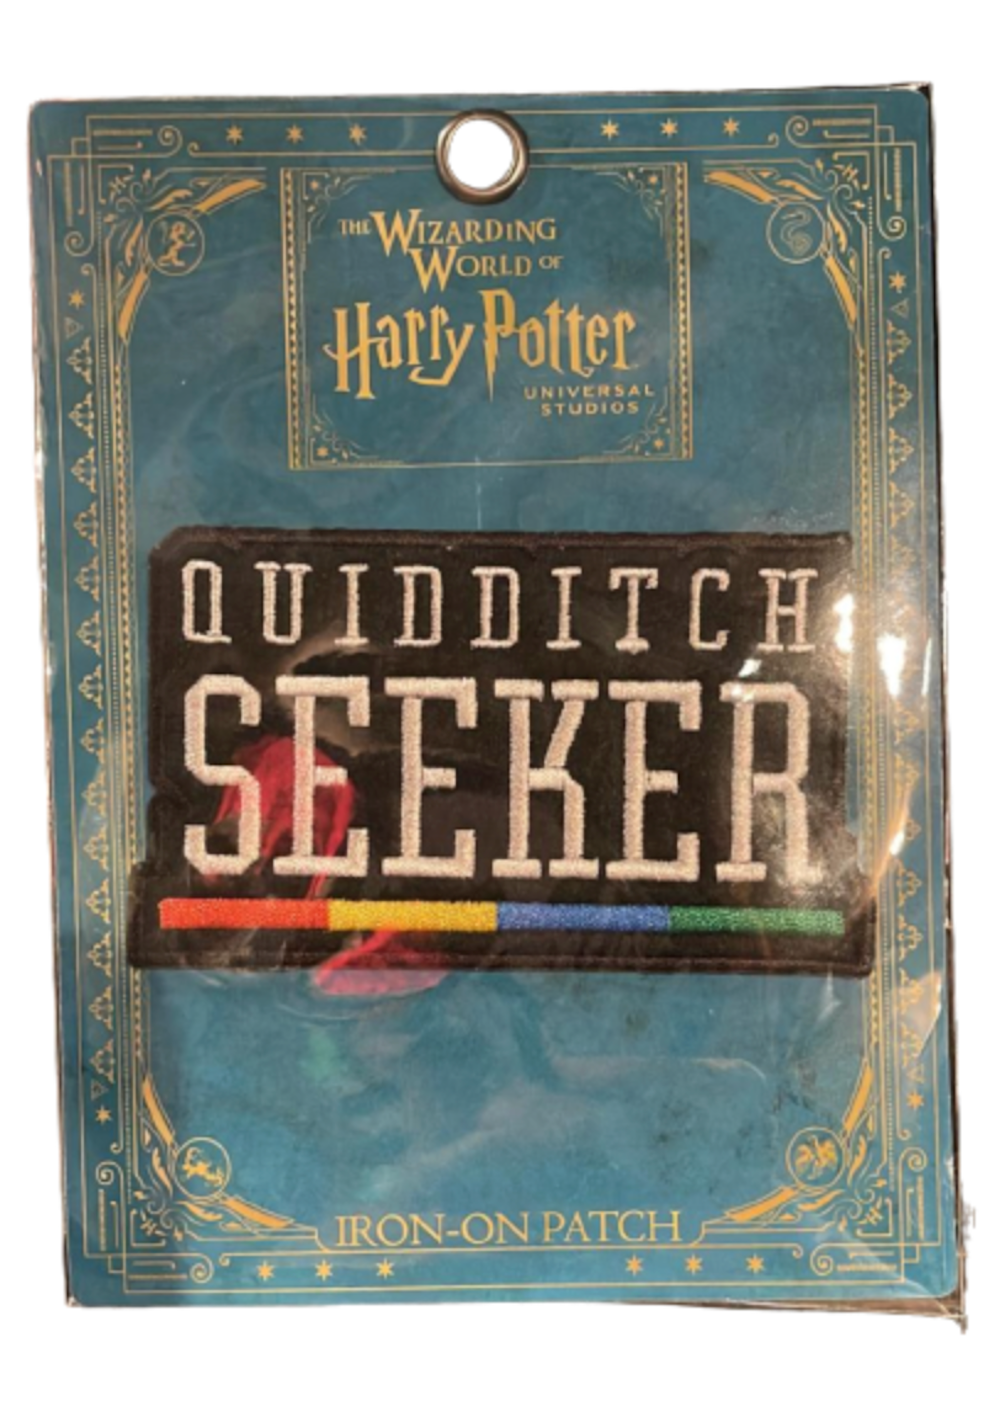 Universal Studios Harry Potter Quidditch Seeker Iron on Patch New with Card